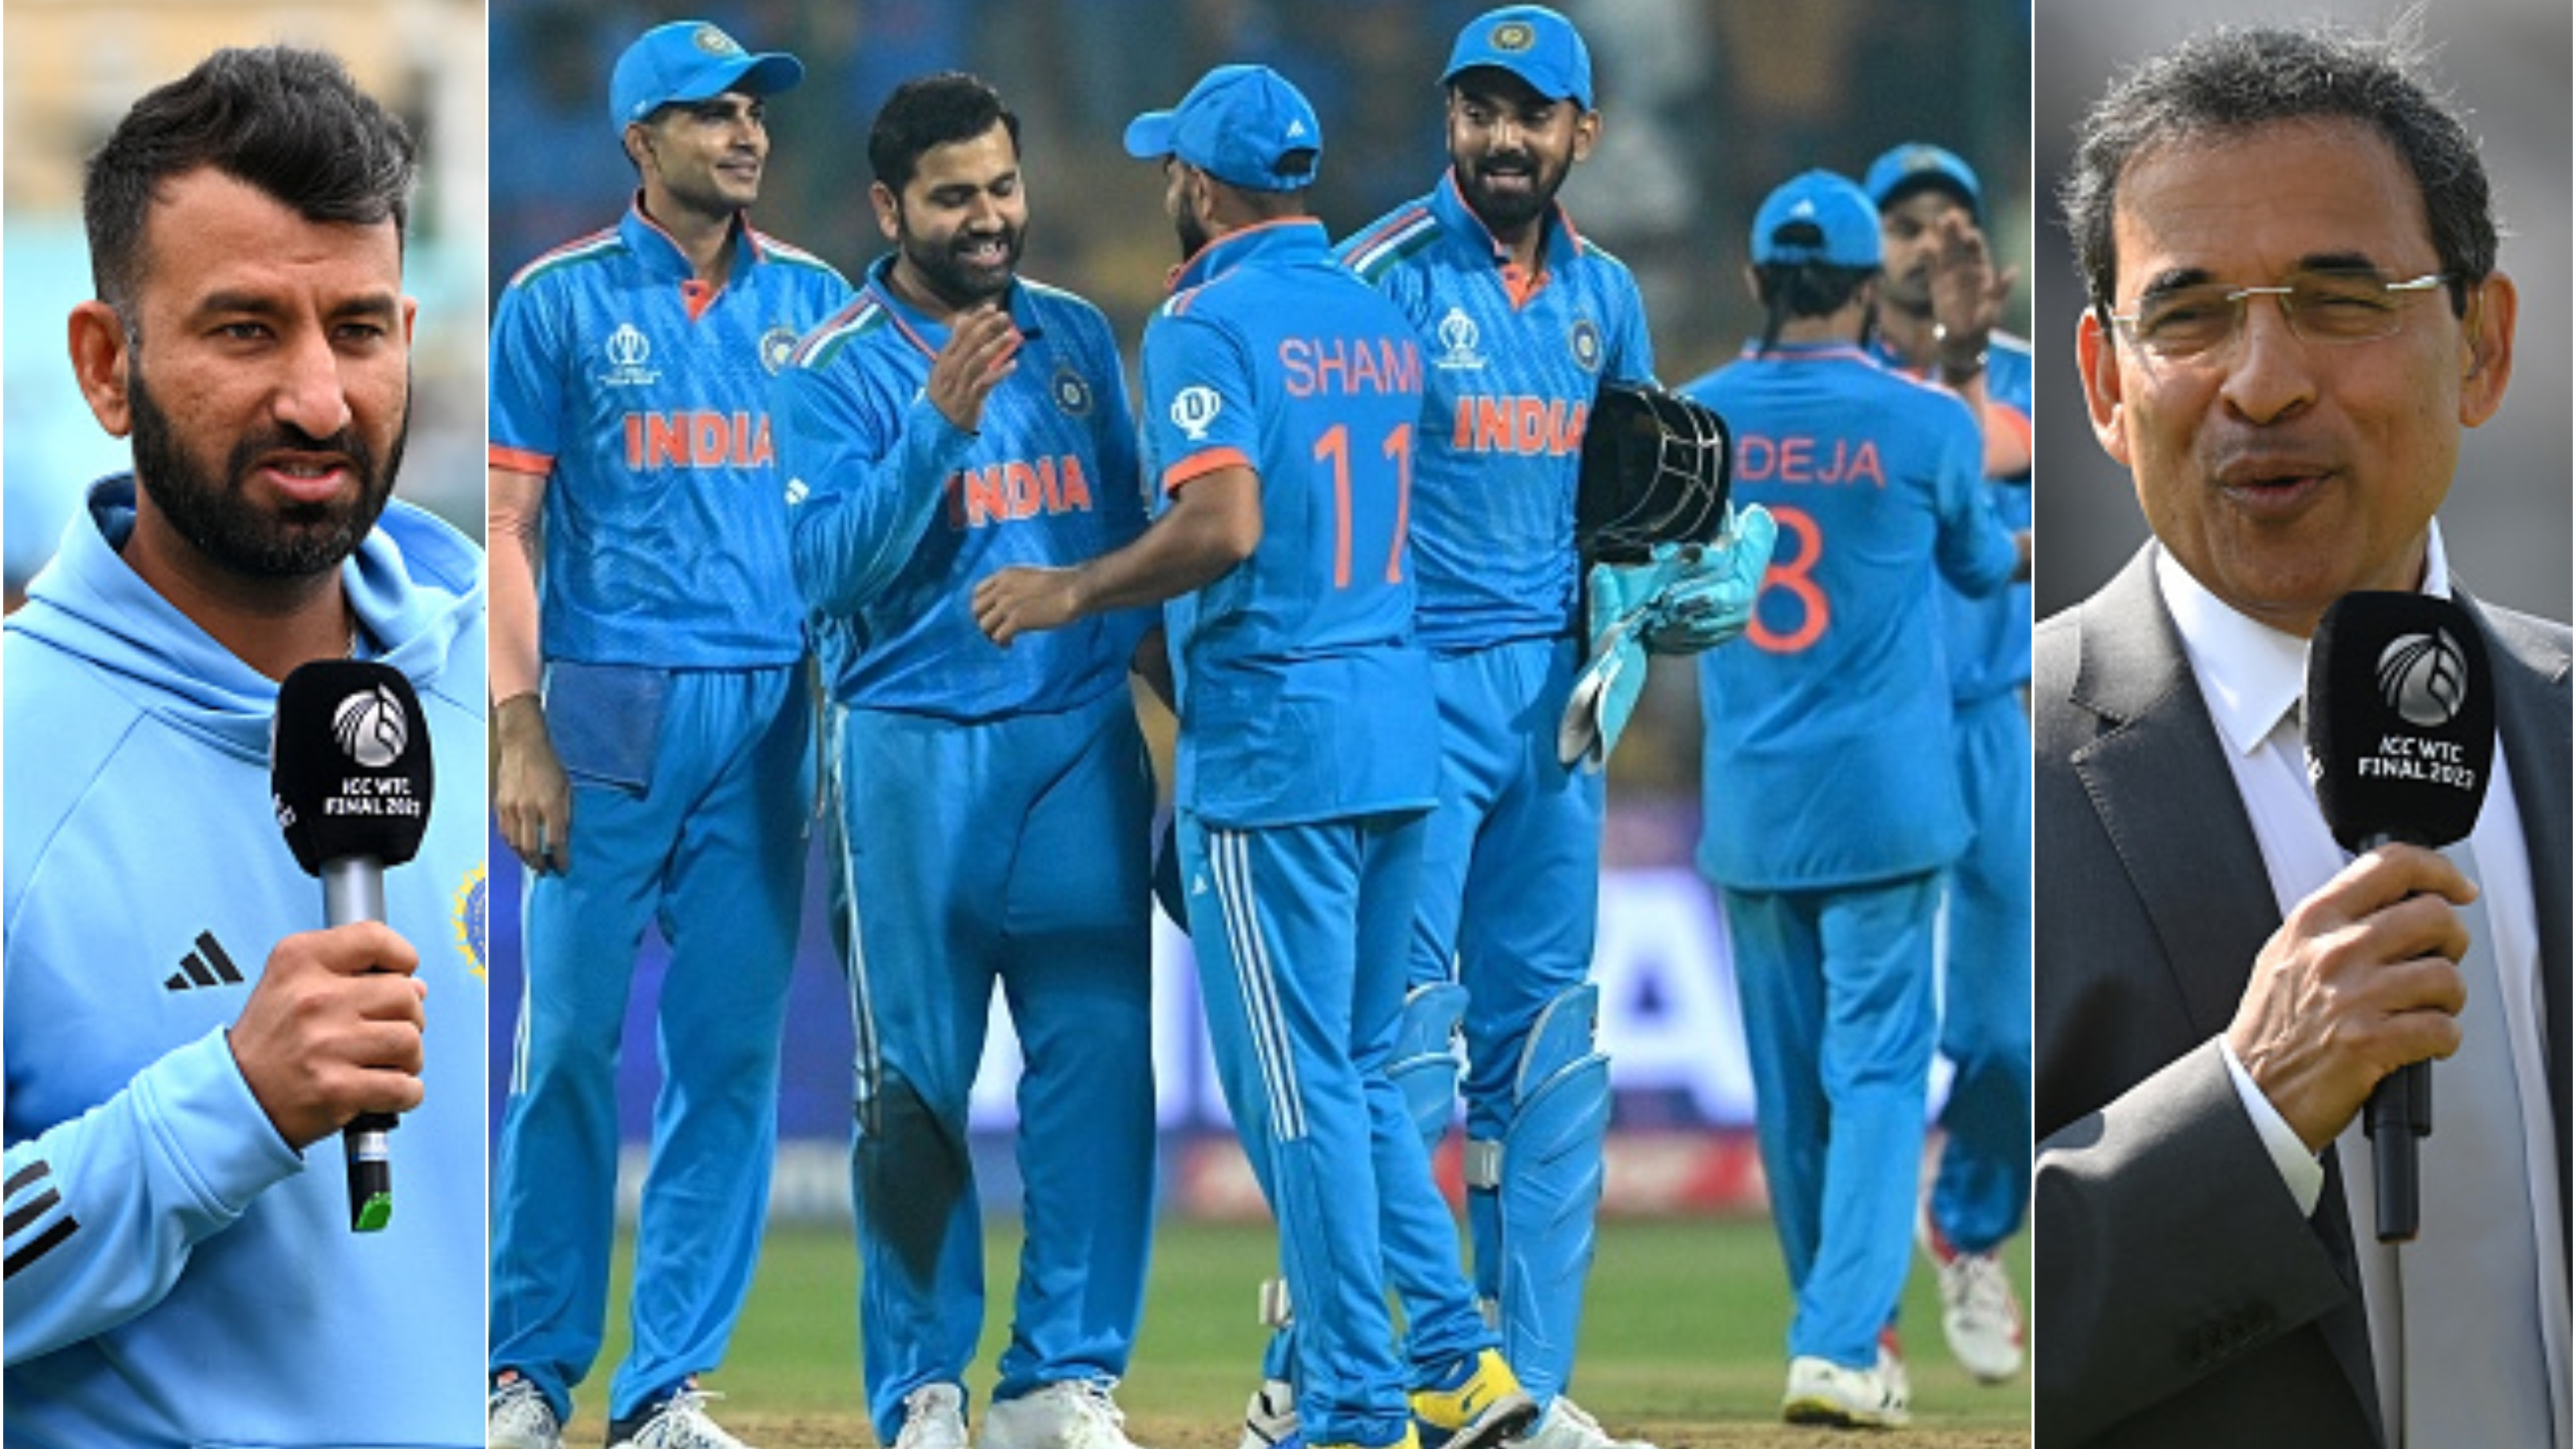 CWC 2023: Cricket fraternity reacts as India rout Netherlands by 160 runs to finish league stage unbeaten